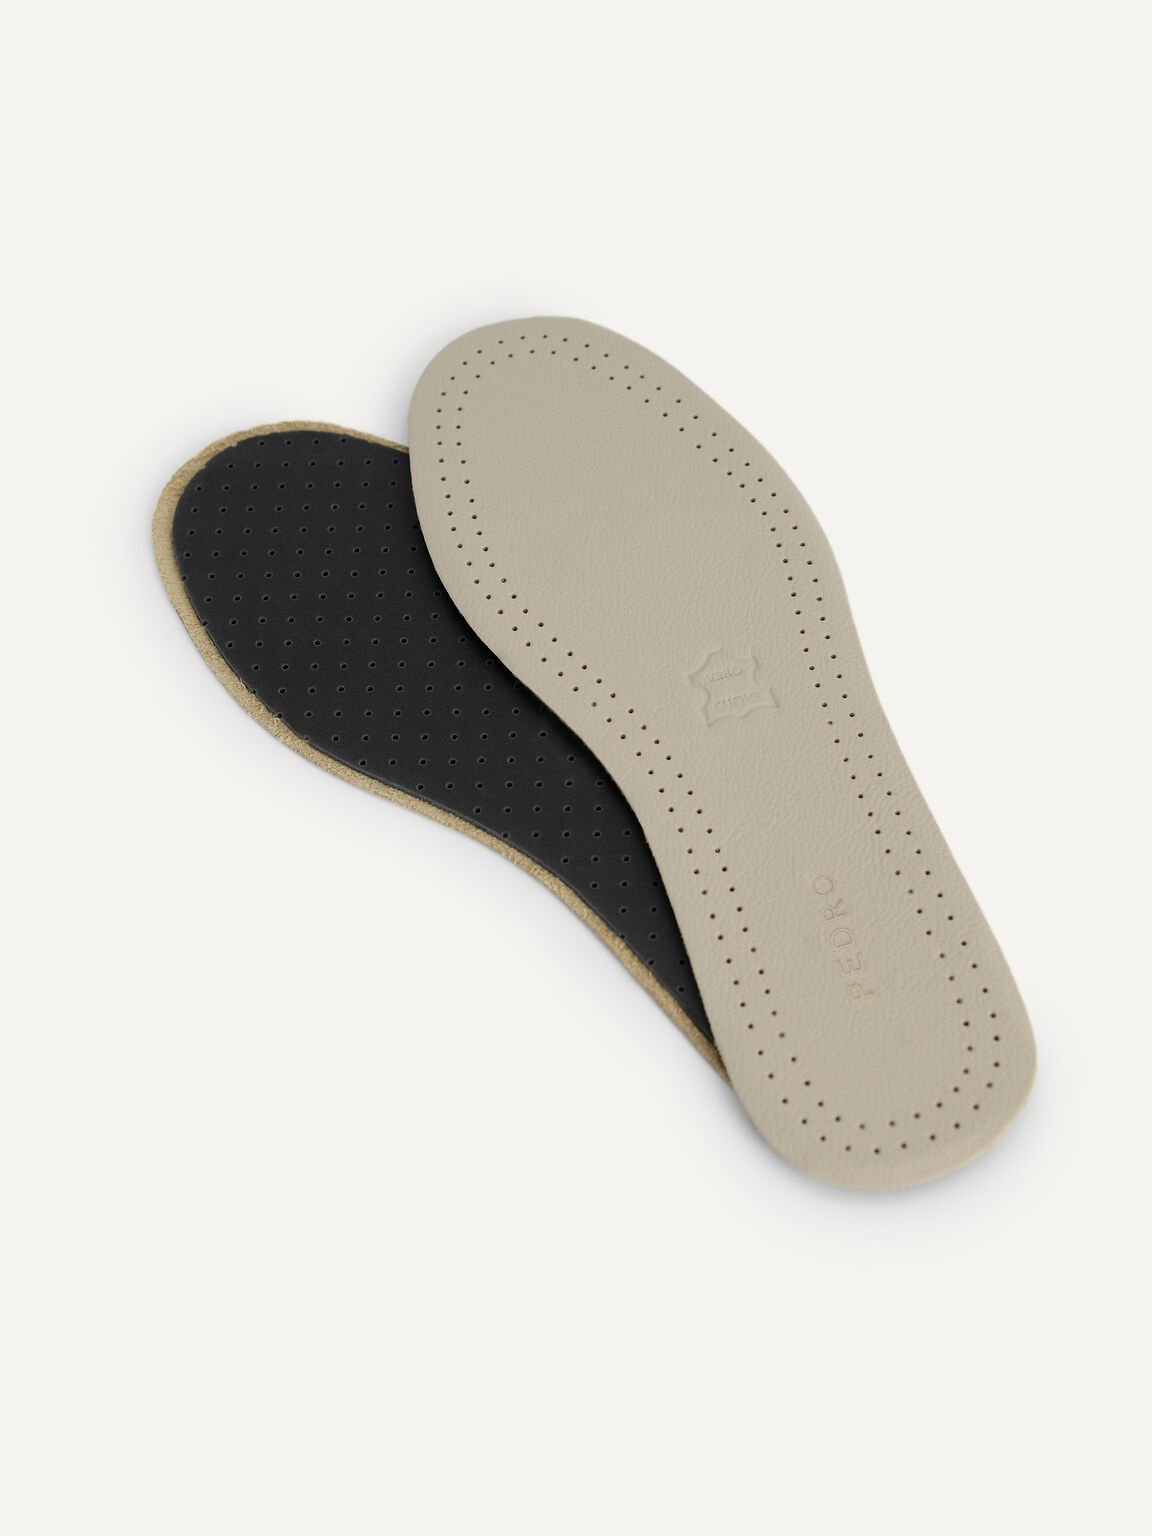 Genuine Leather Insole (M), Beige, hi-res